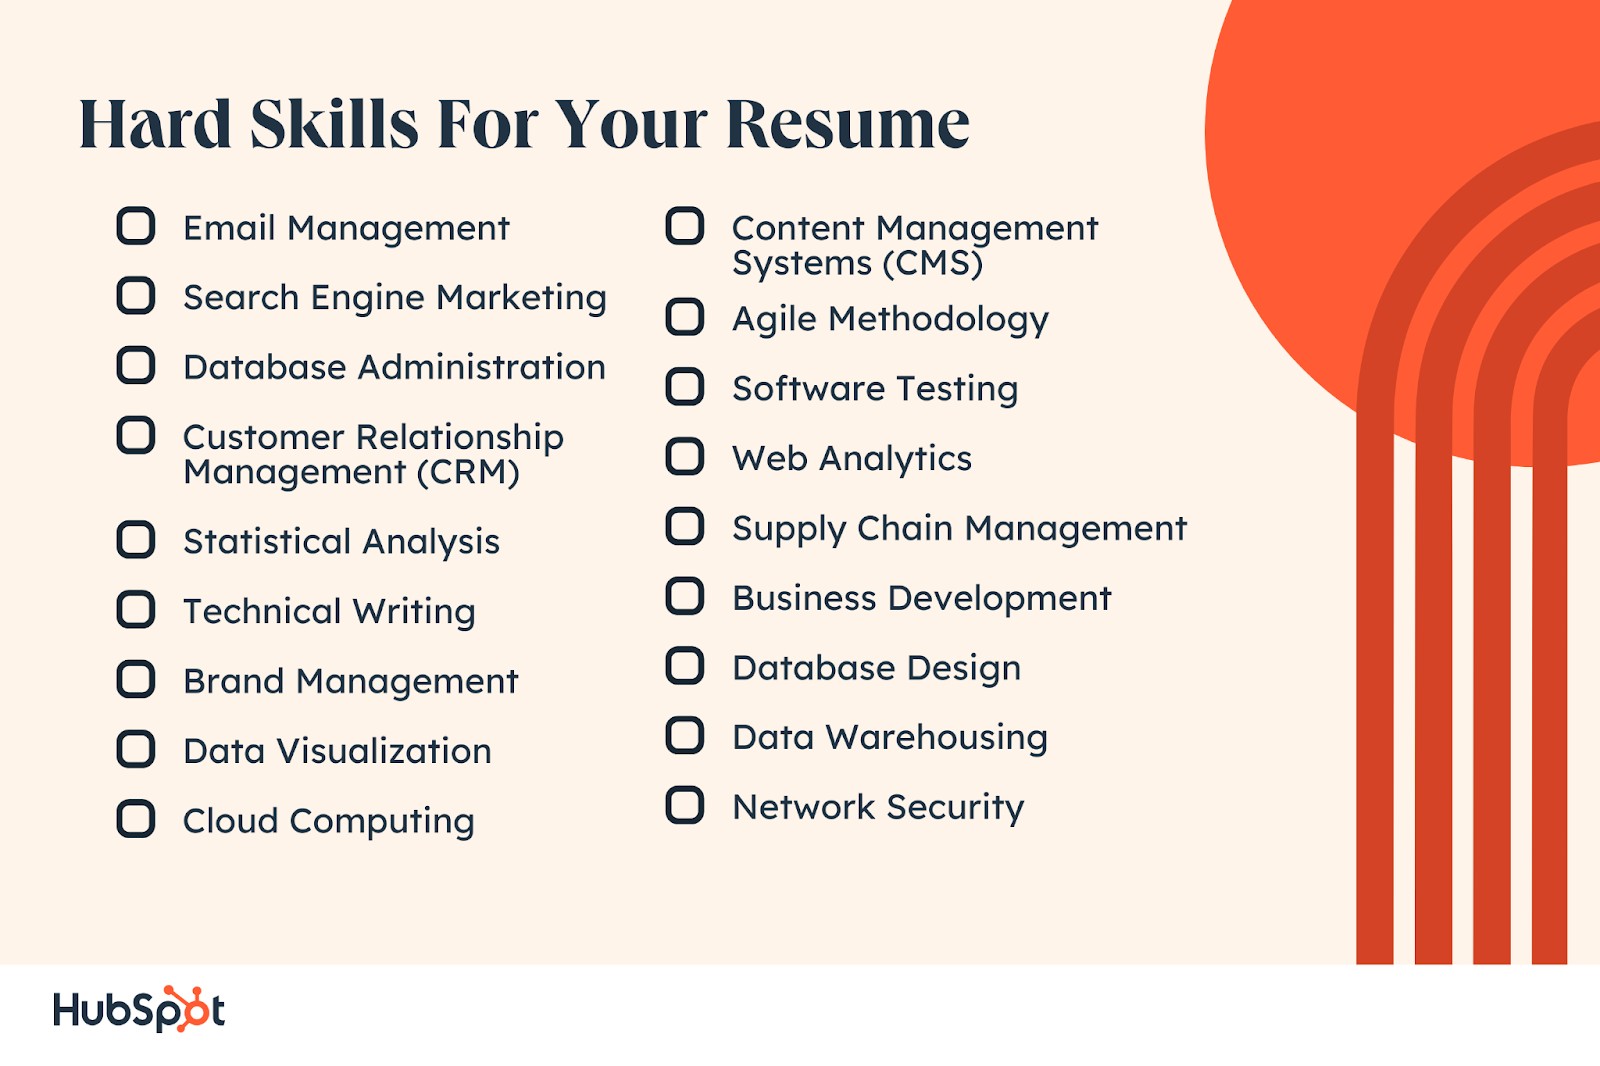 Hard Skills For Your Resume. Email Management. Search Engine Marketing. Database Administration. Customer Relationship Management (CRM). Statistical Analysis. Technical Writing. Content Management Systems (CMS). Agile Methodology. Software Testing. Web Analytics. Supply Chain Management. Business Development. Brand Management. Data Visualization. Cloud Computing. Database Design. Data Warehousing. Network Security.